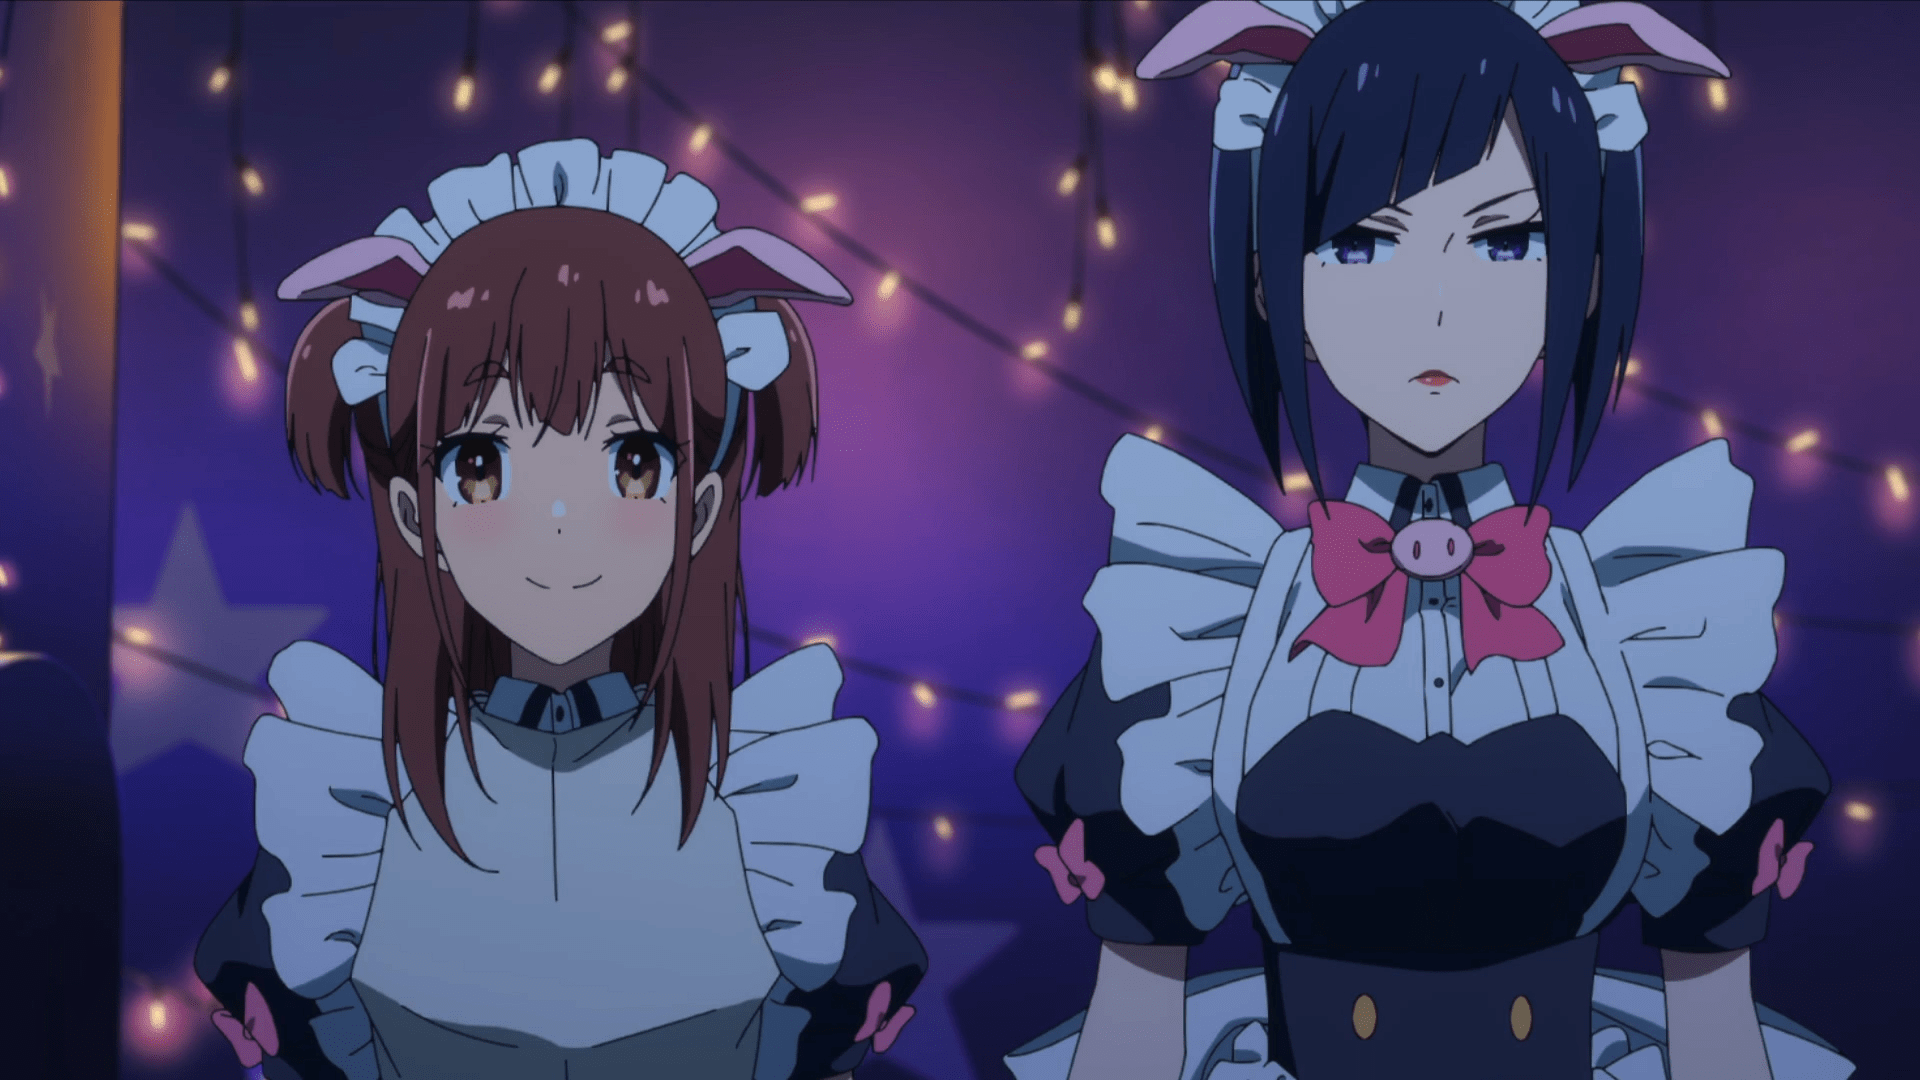 Love Akiba Maid War? Here Are More Battling Maids (and Butlers)